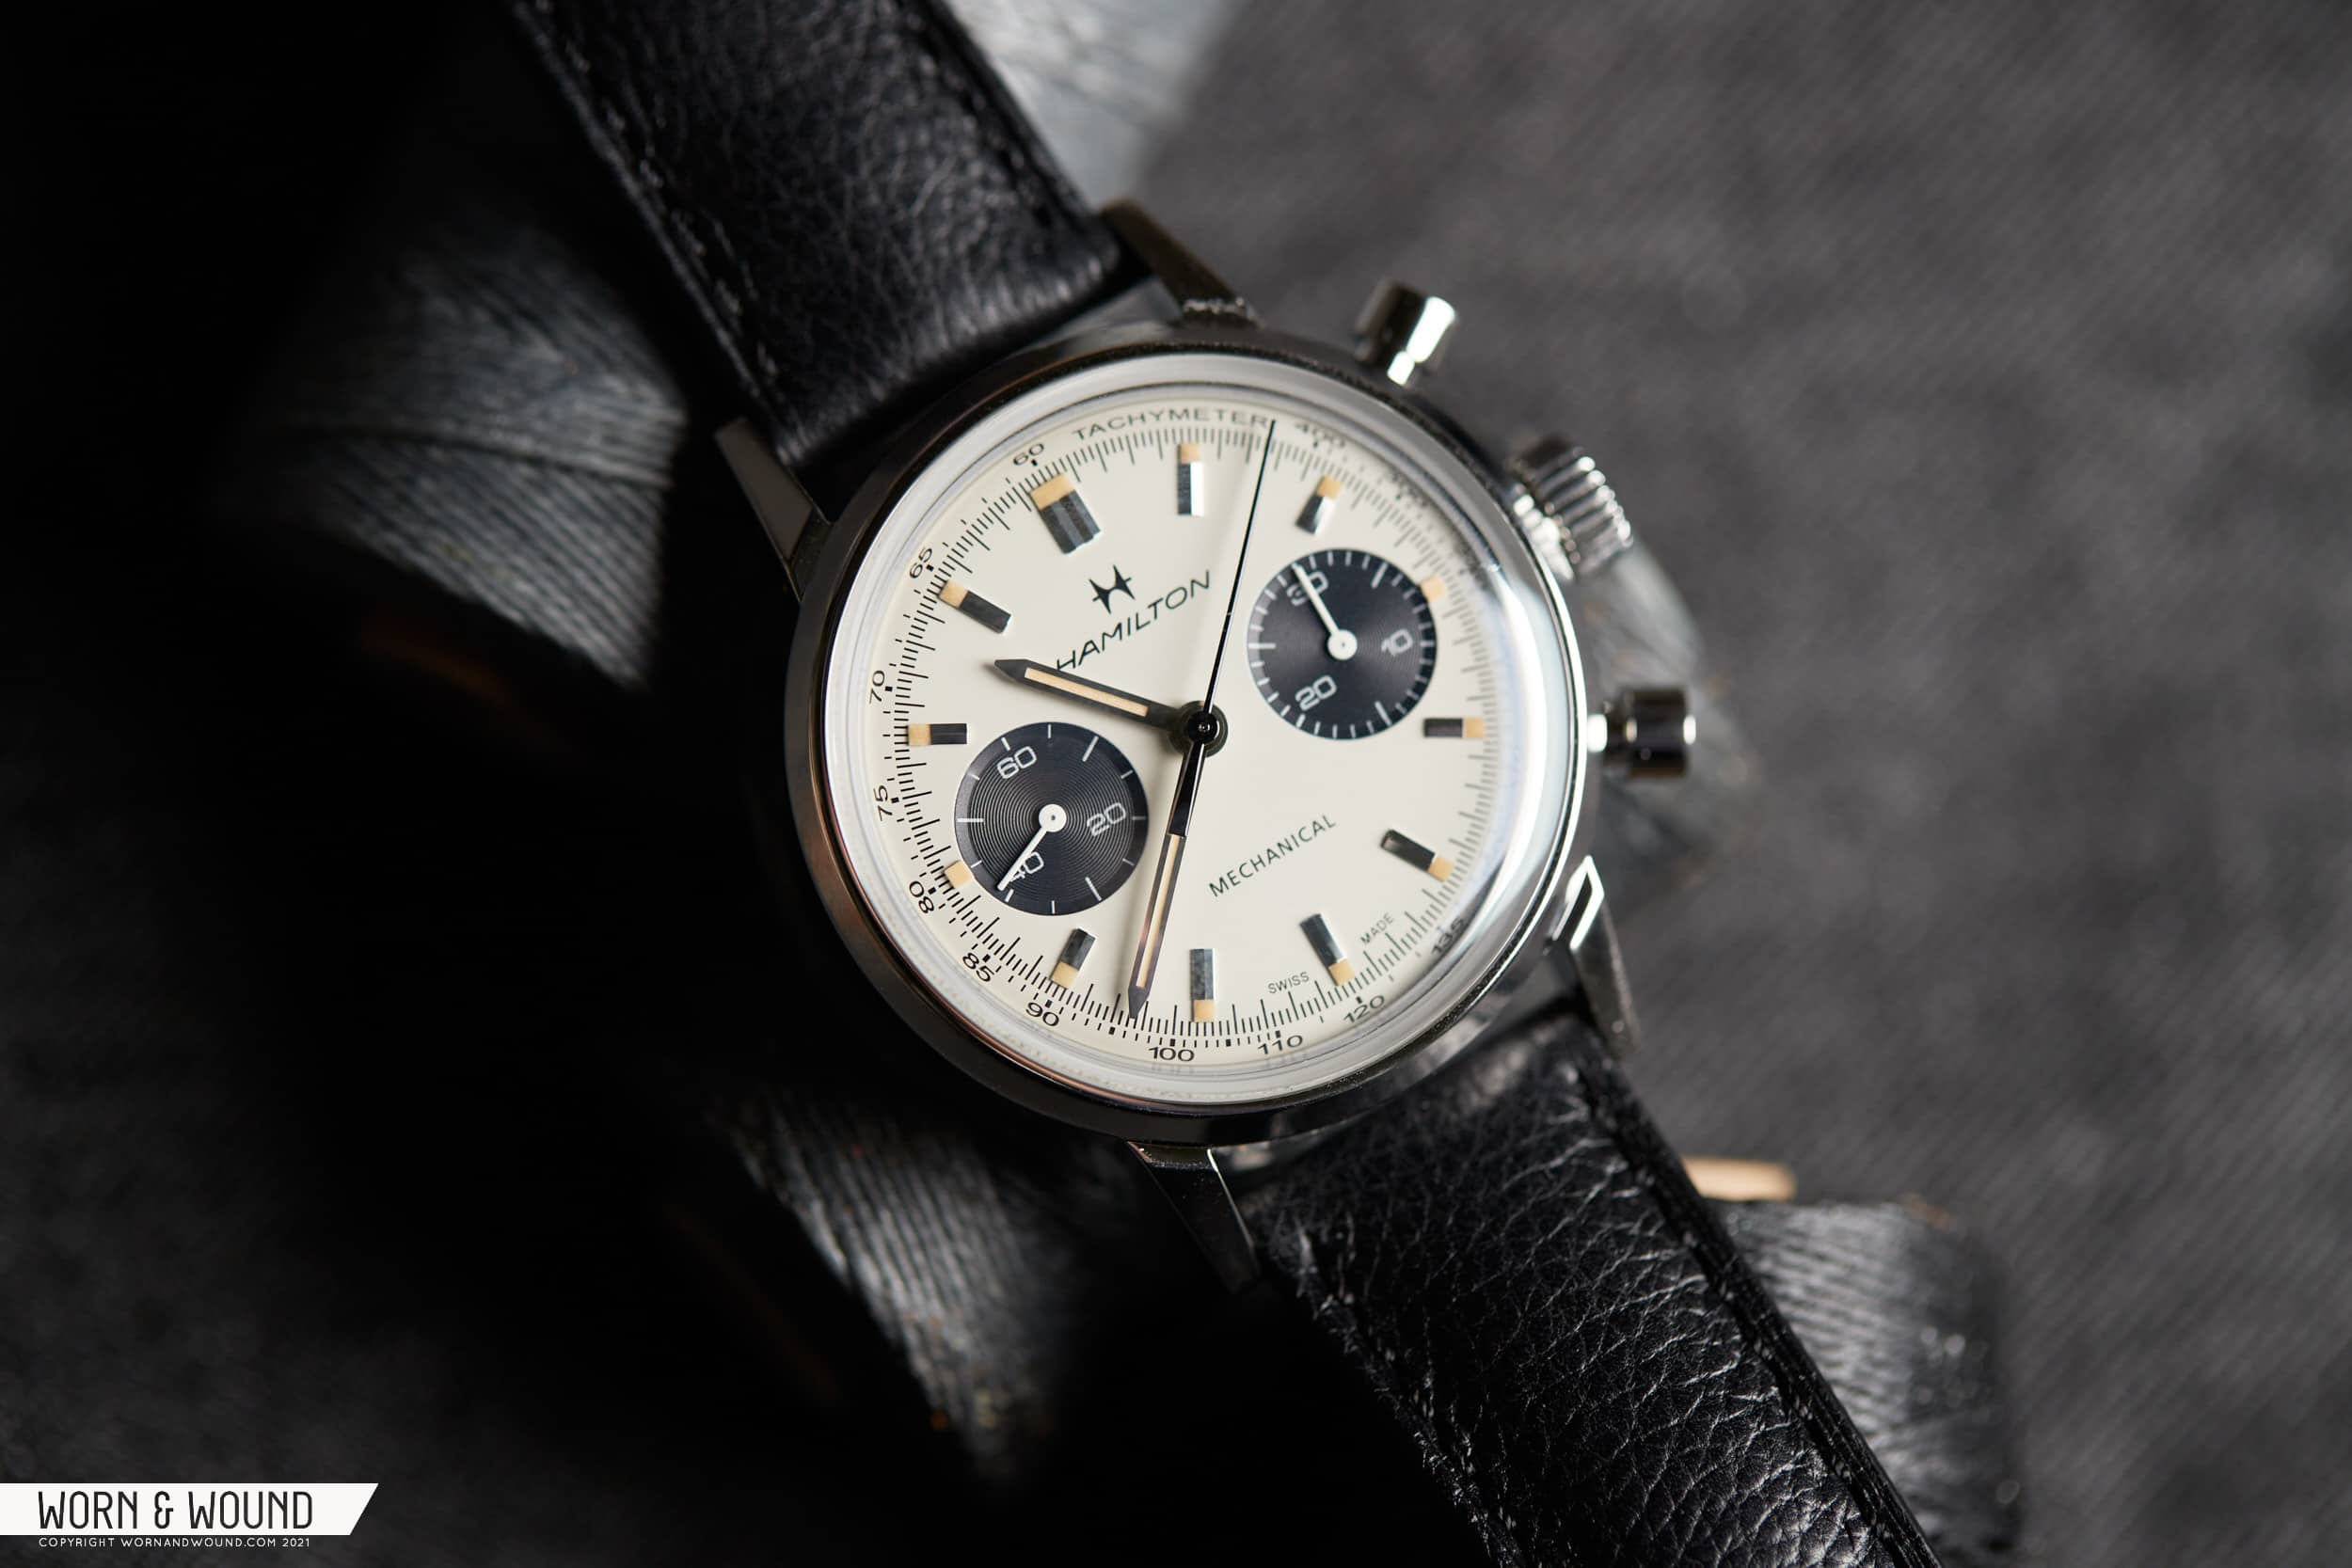 Hands-On With The Hand-Wound Hamilton Chronograph H - Worn & Wound